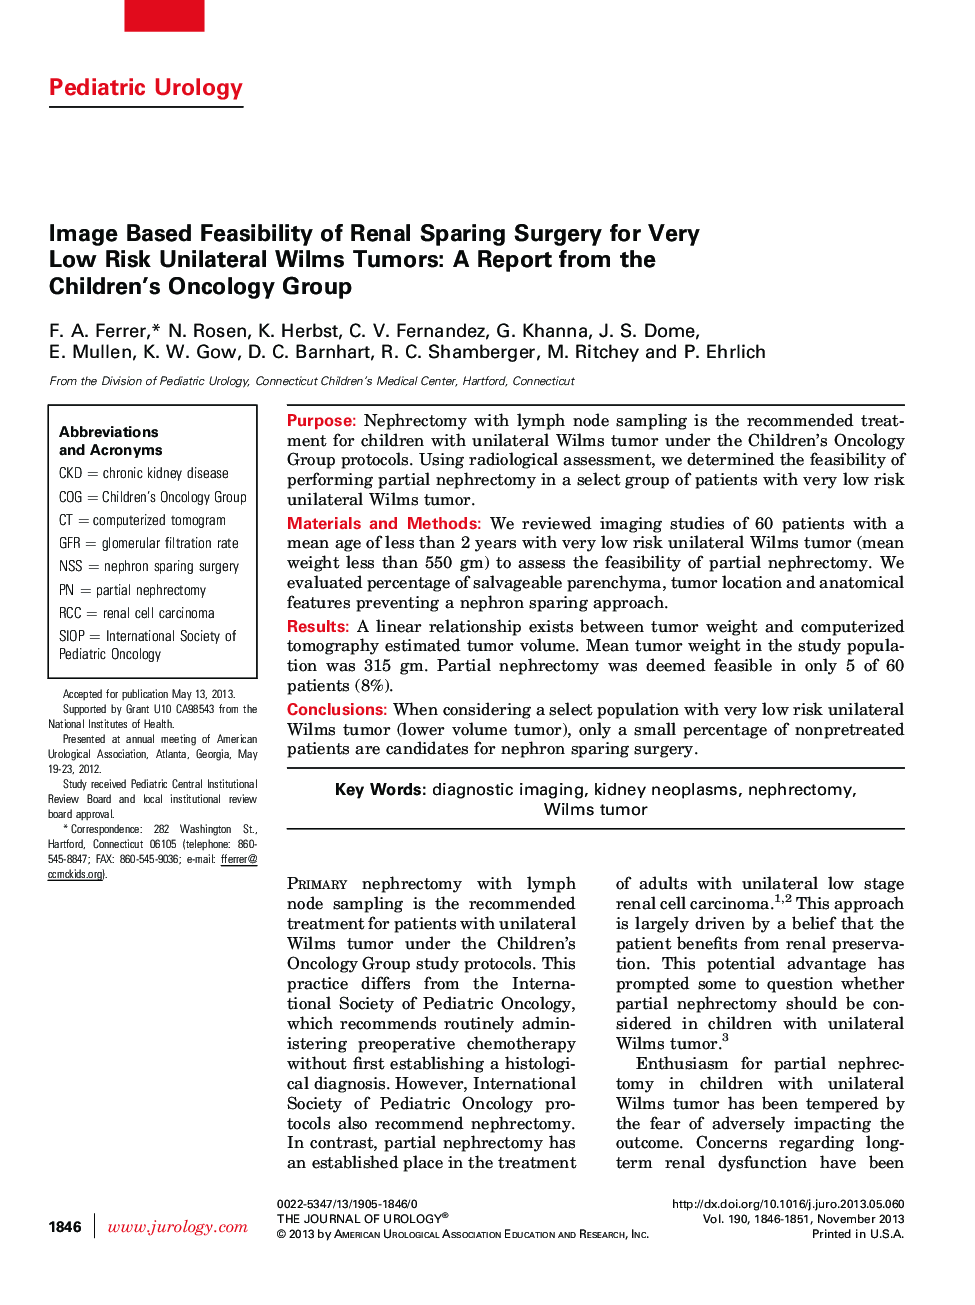 Image Based Feasibility of Renal Sparing Surgery for Very Low Risk Unilateral Wilms Tumors: A Report from the Children’s Oncology Group 